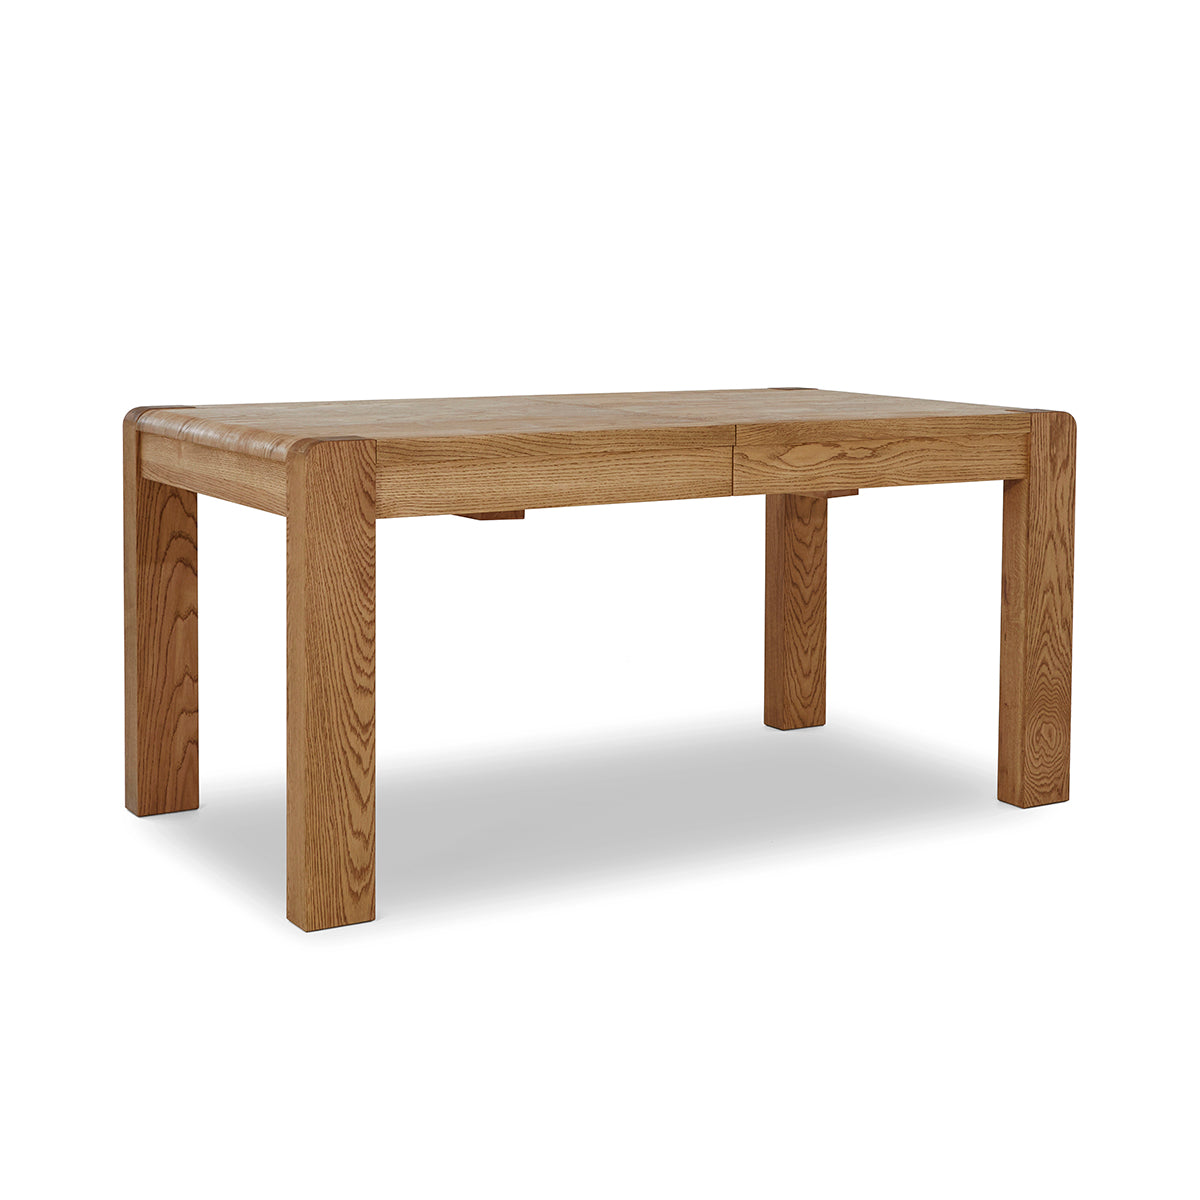 Edson Dining Tables